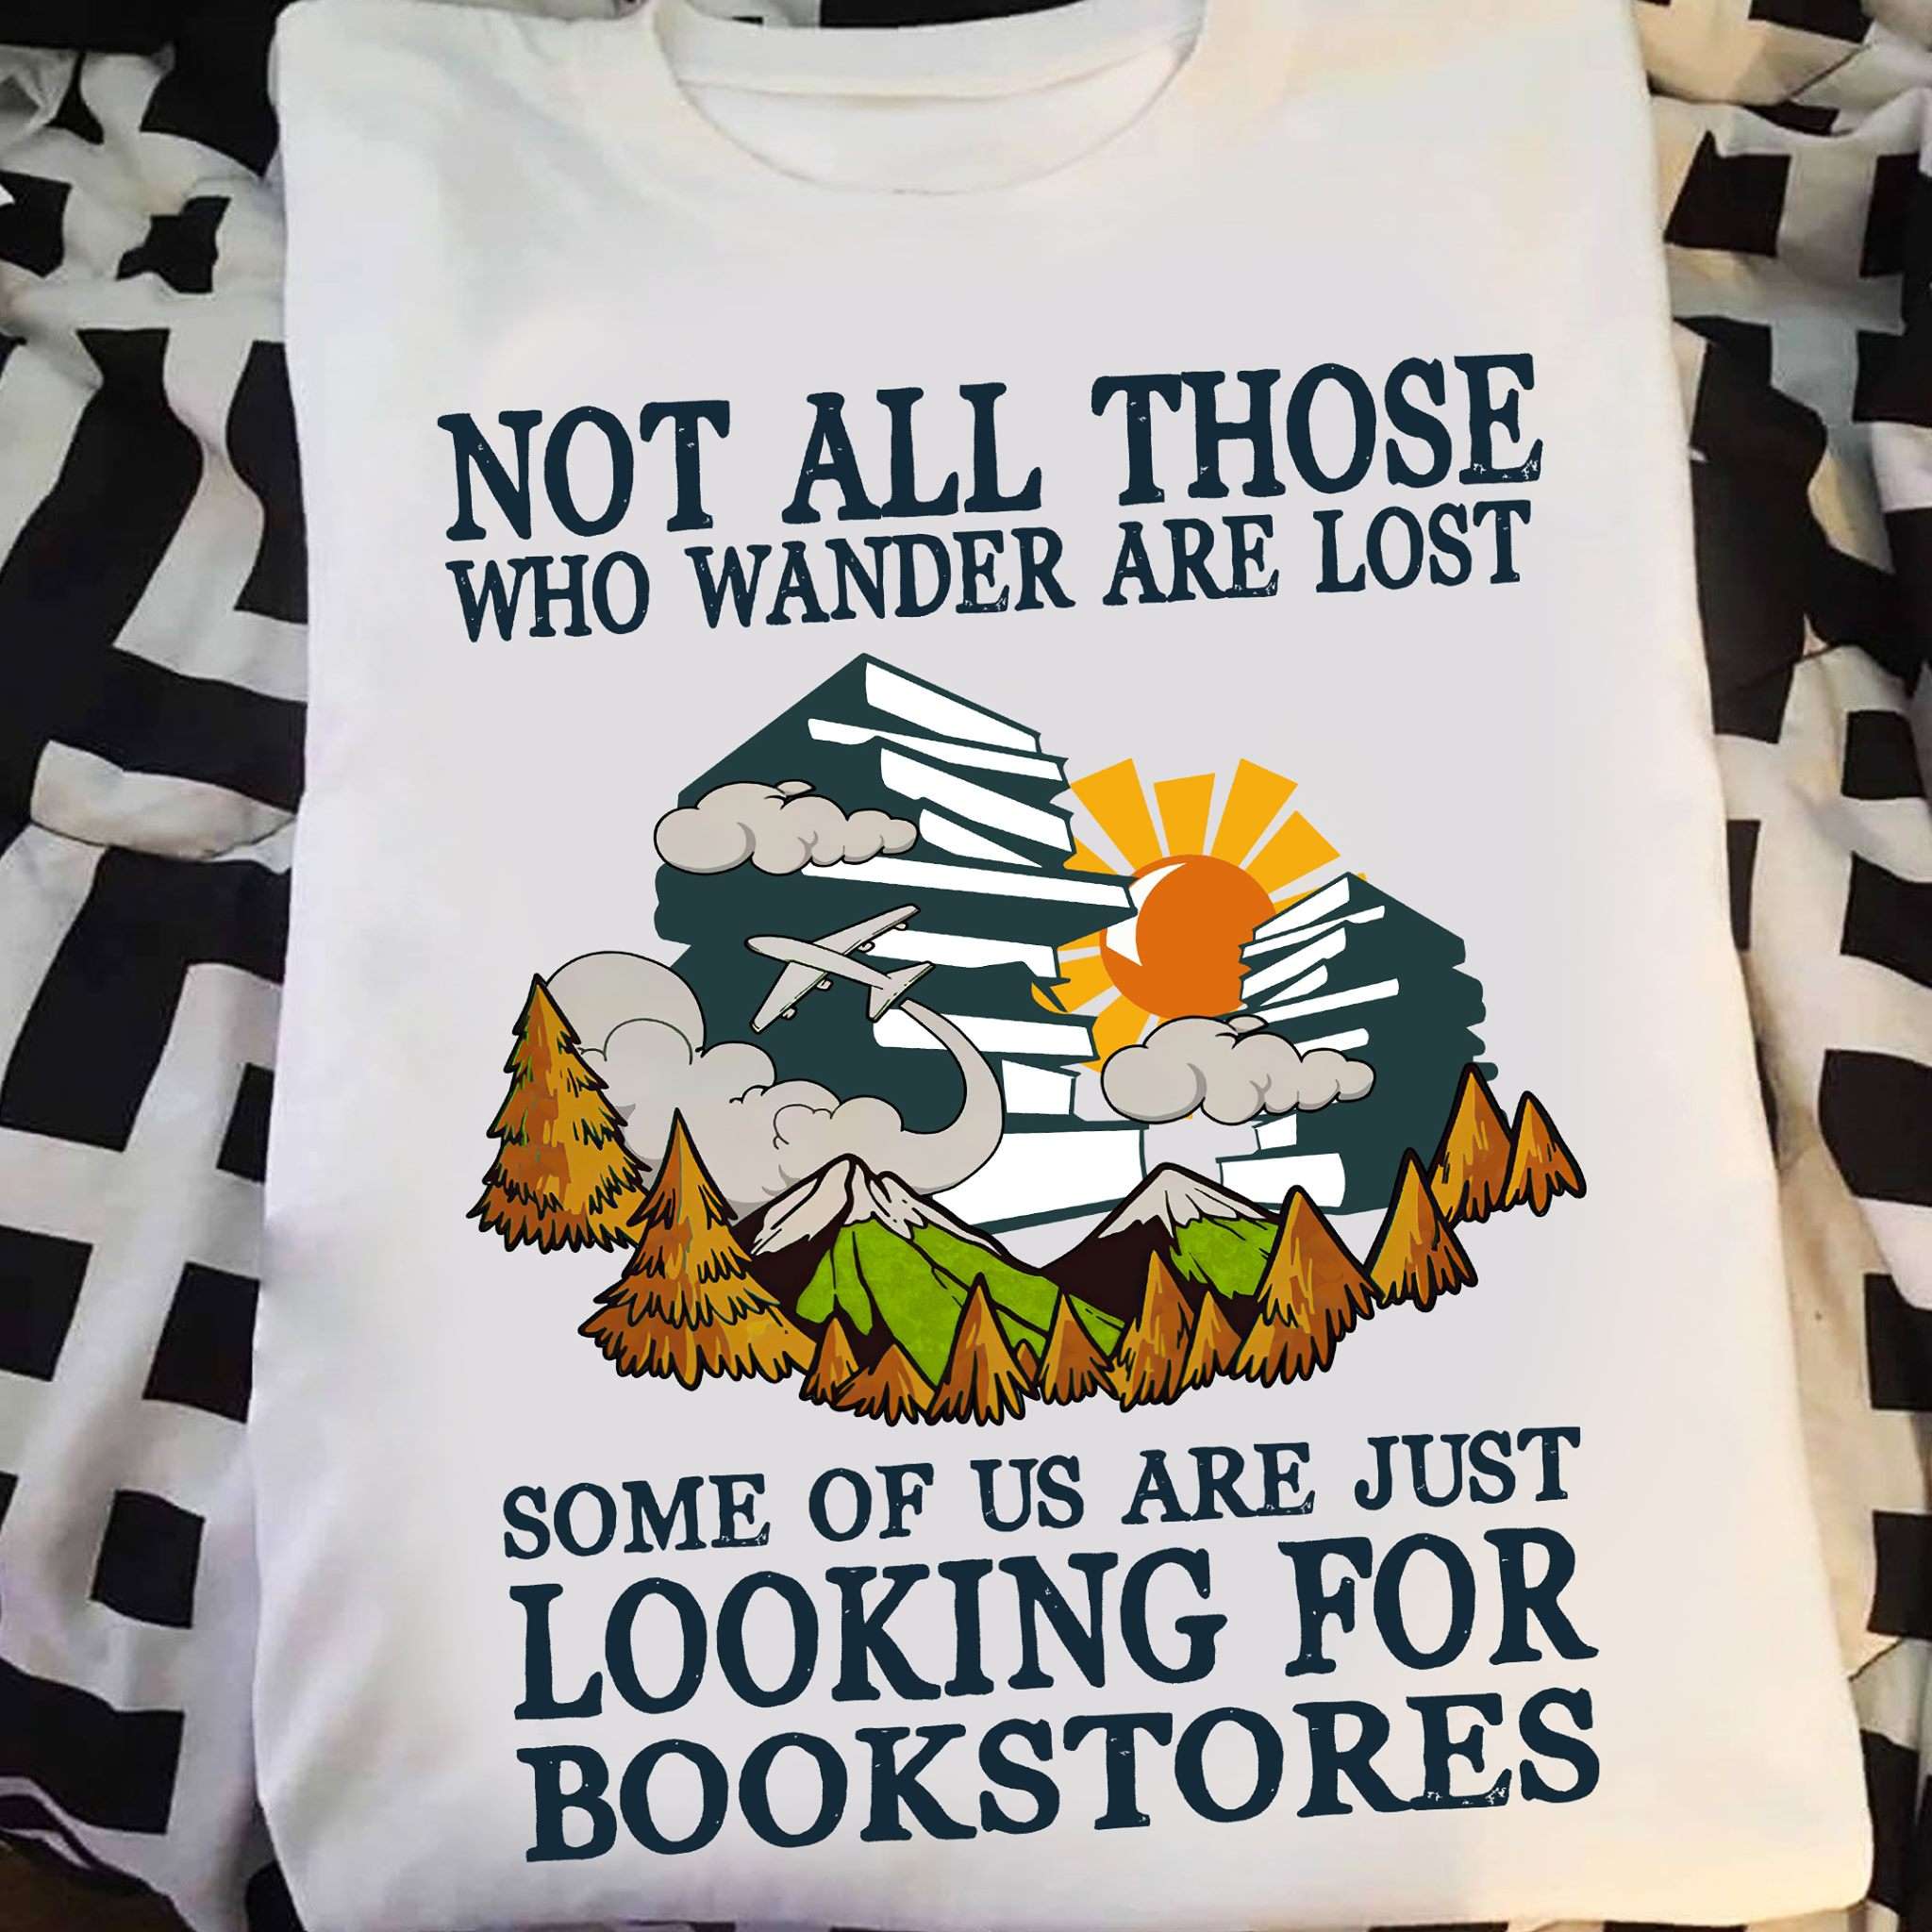 Not all those who wander are lost, some of us are just looking for bookstore - Gift for bookaholic